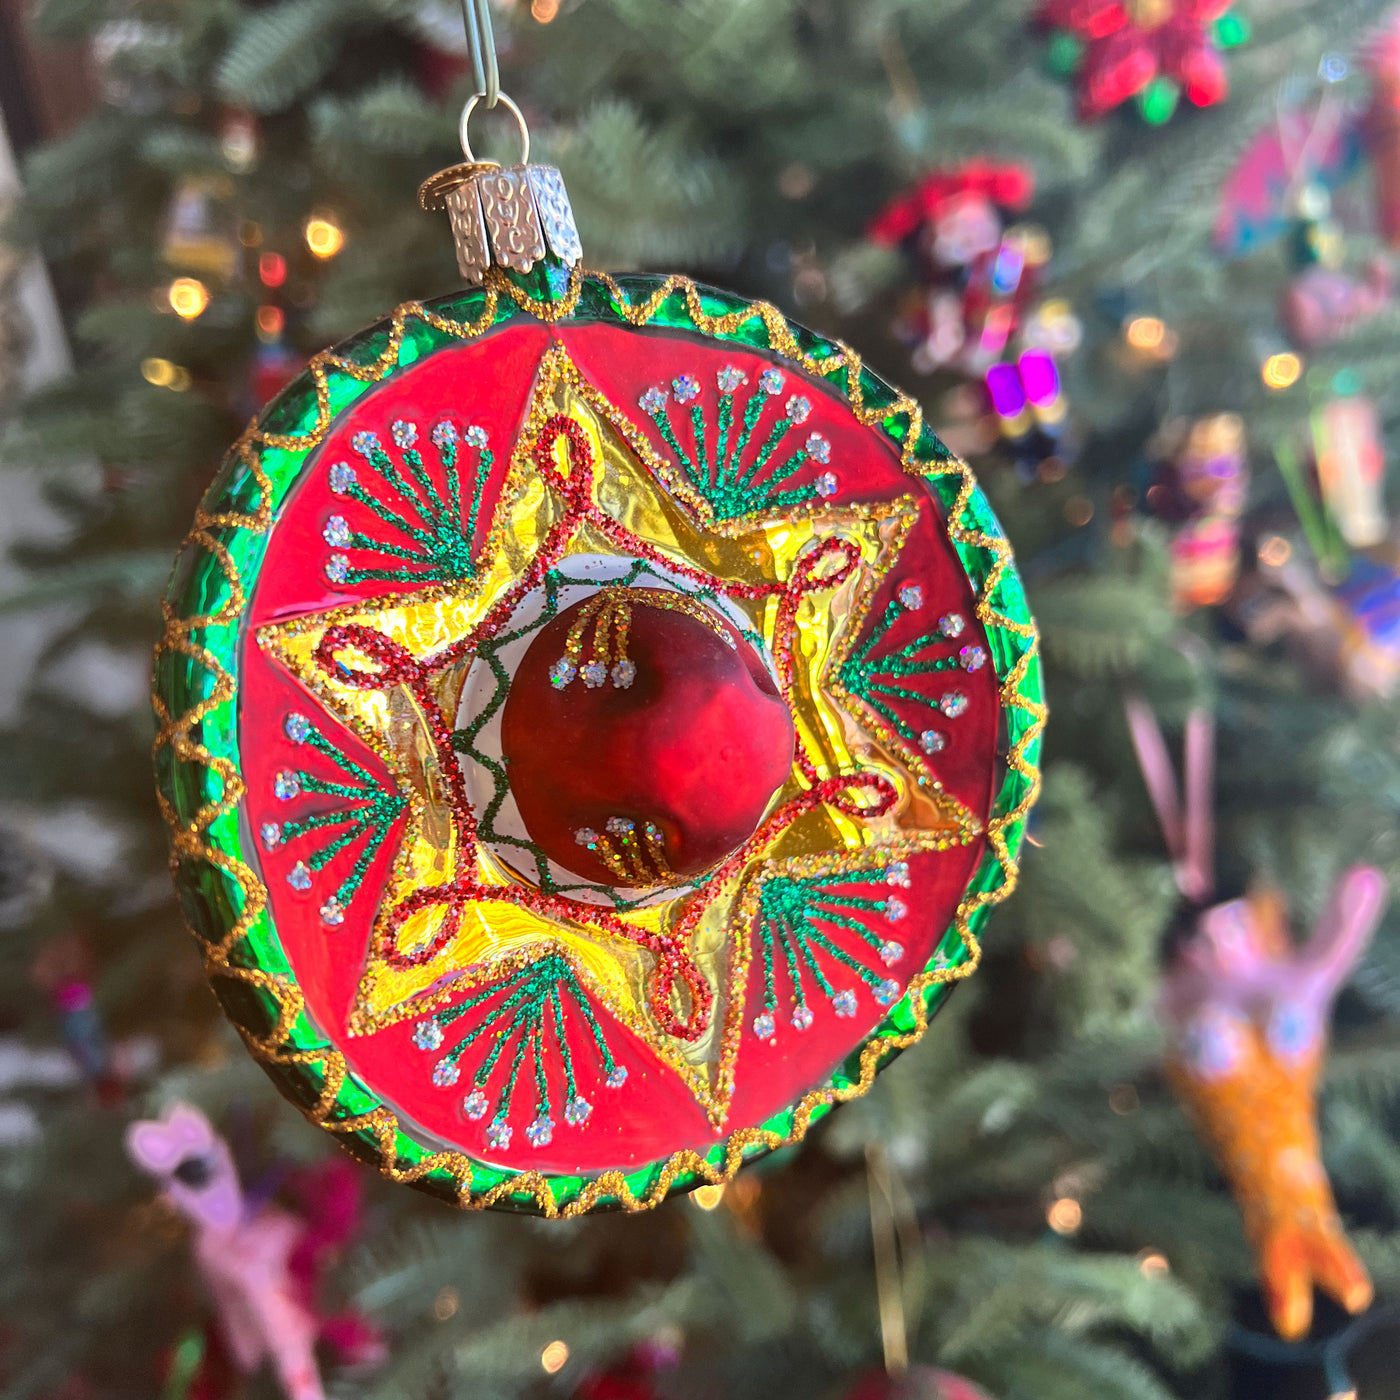 photo of a glass sombrero christmas ornament with glitter details